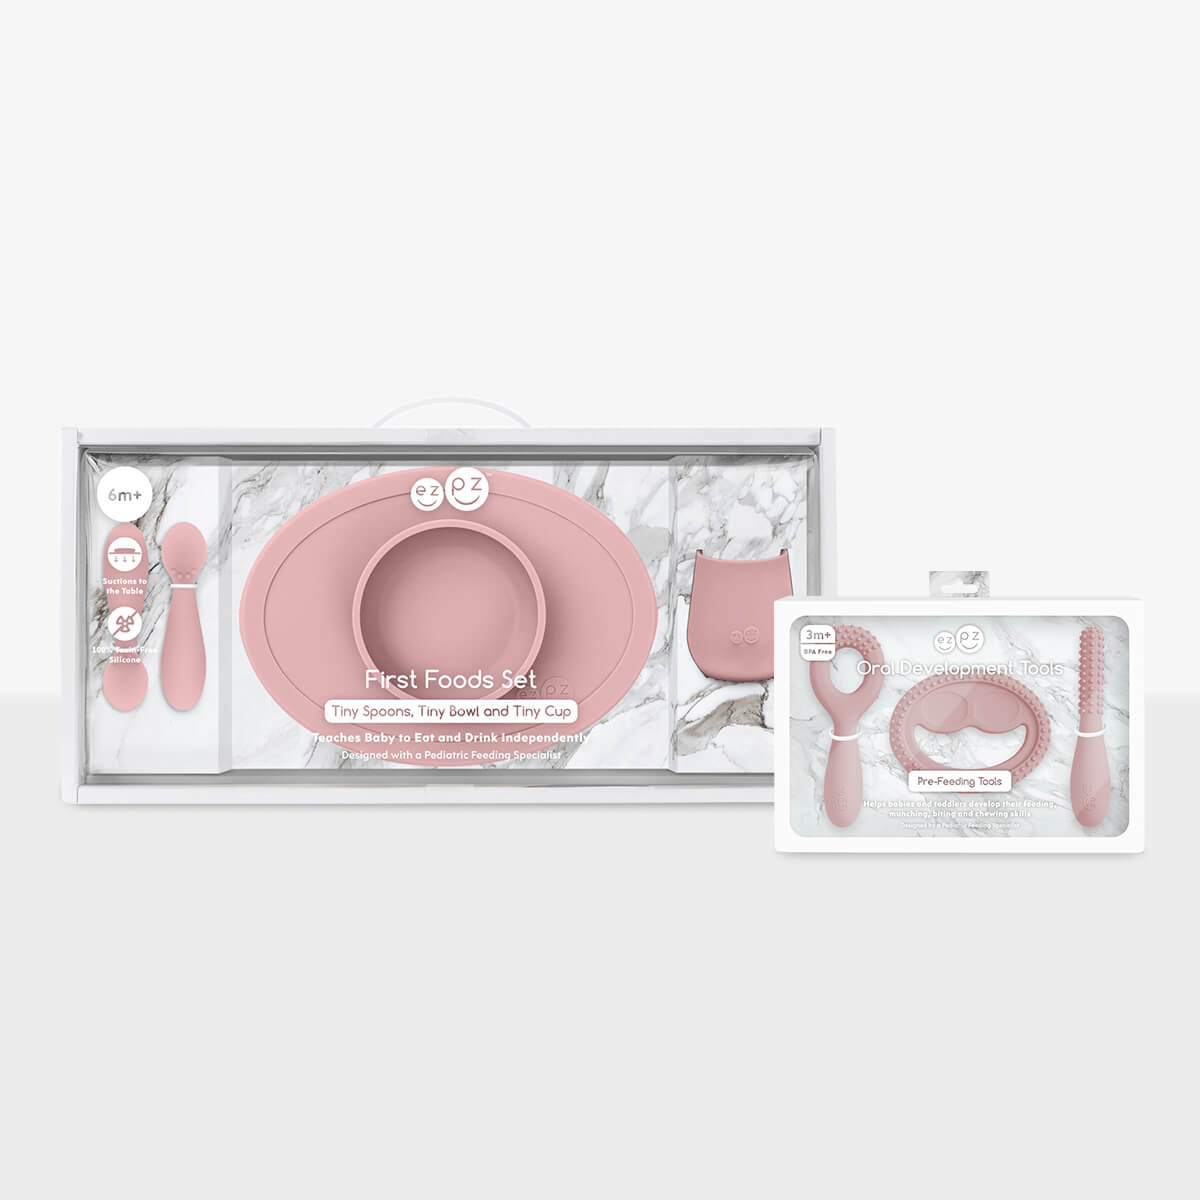 First Foods Set – ezpz Middle East